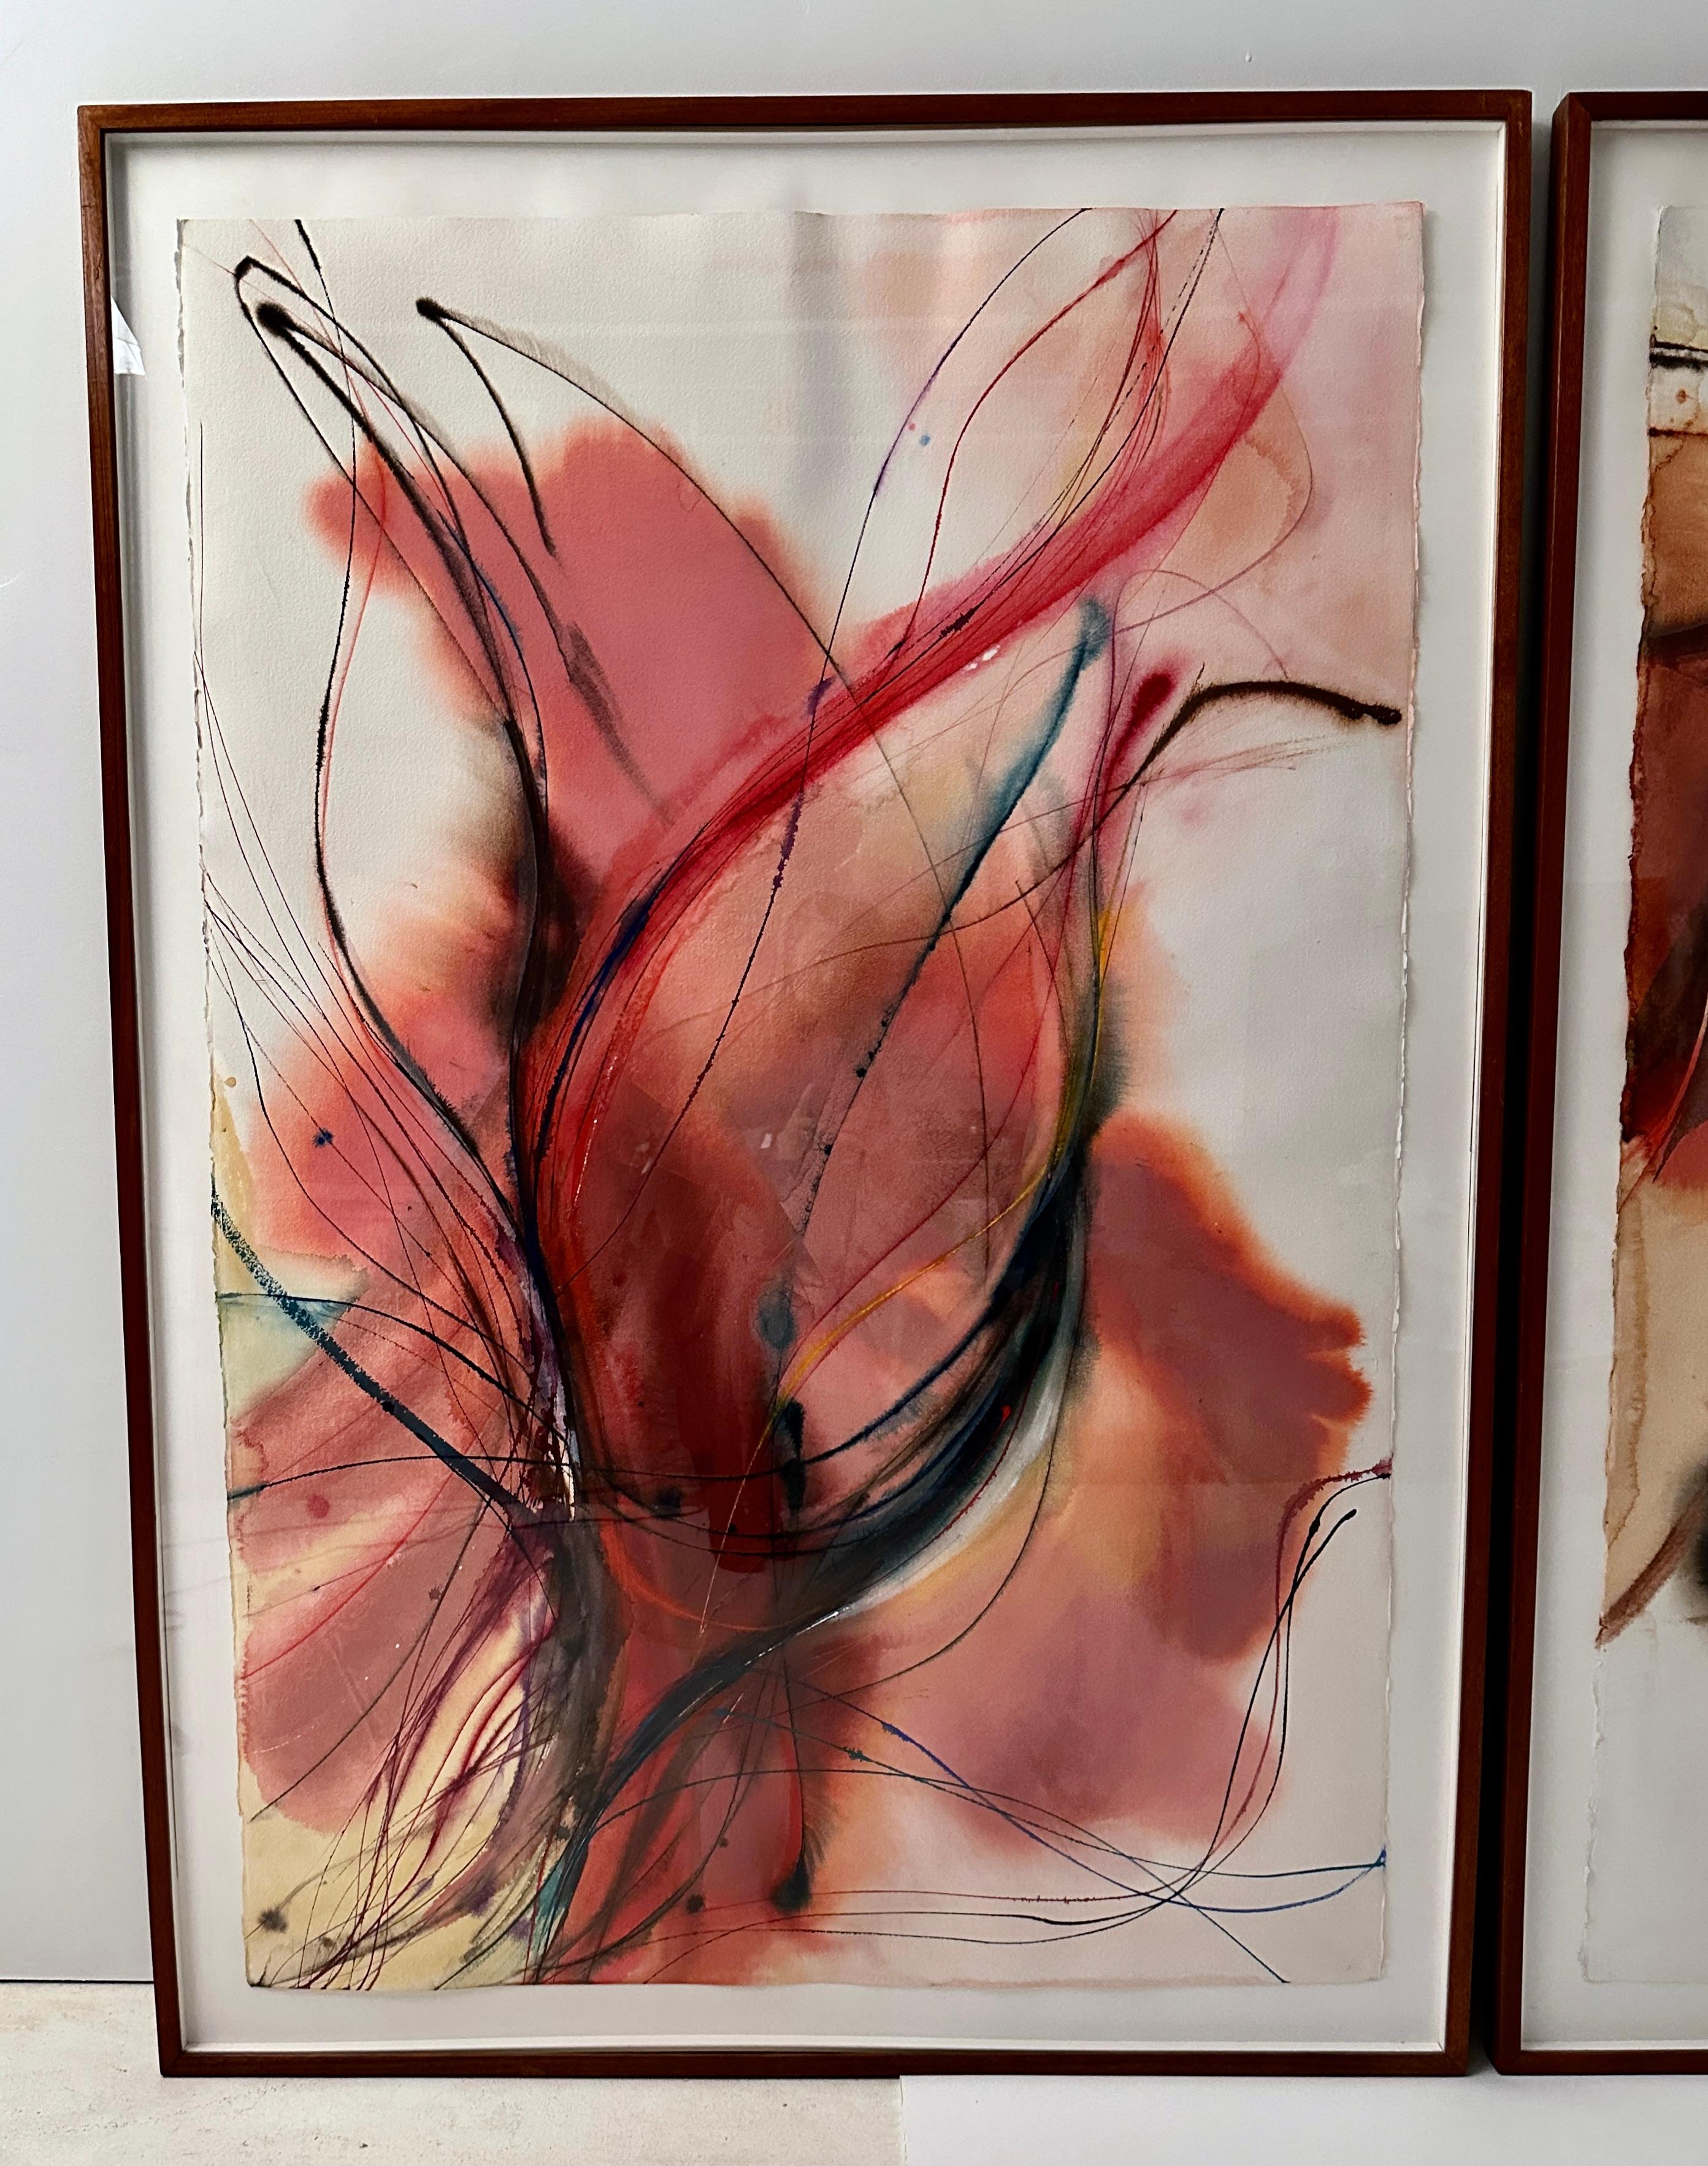 These large works by Bernice Alpert Winick are acrylic on paper shown in their original mahogany finished frames. Great size: framed dimensions 66